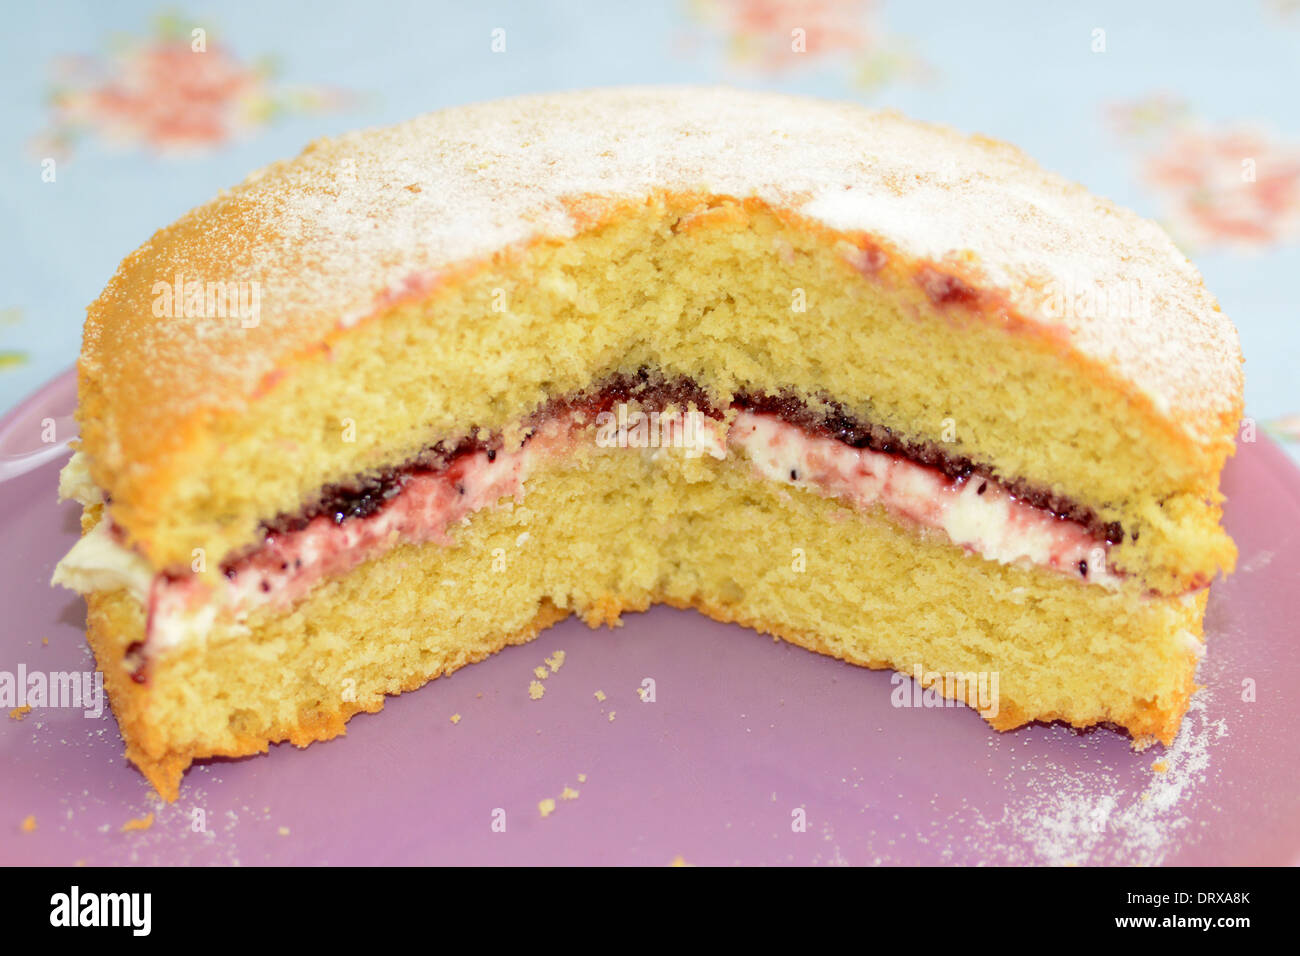 Homemade Victoria sponge cake on a pink plate Stock Photo